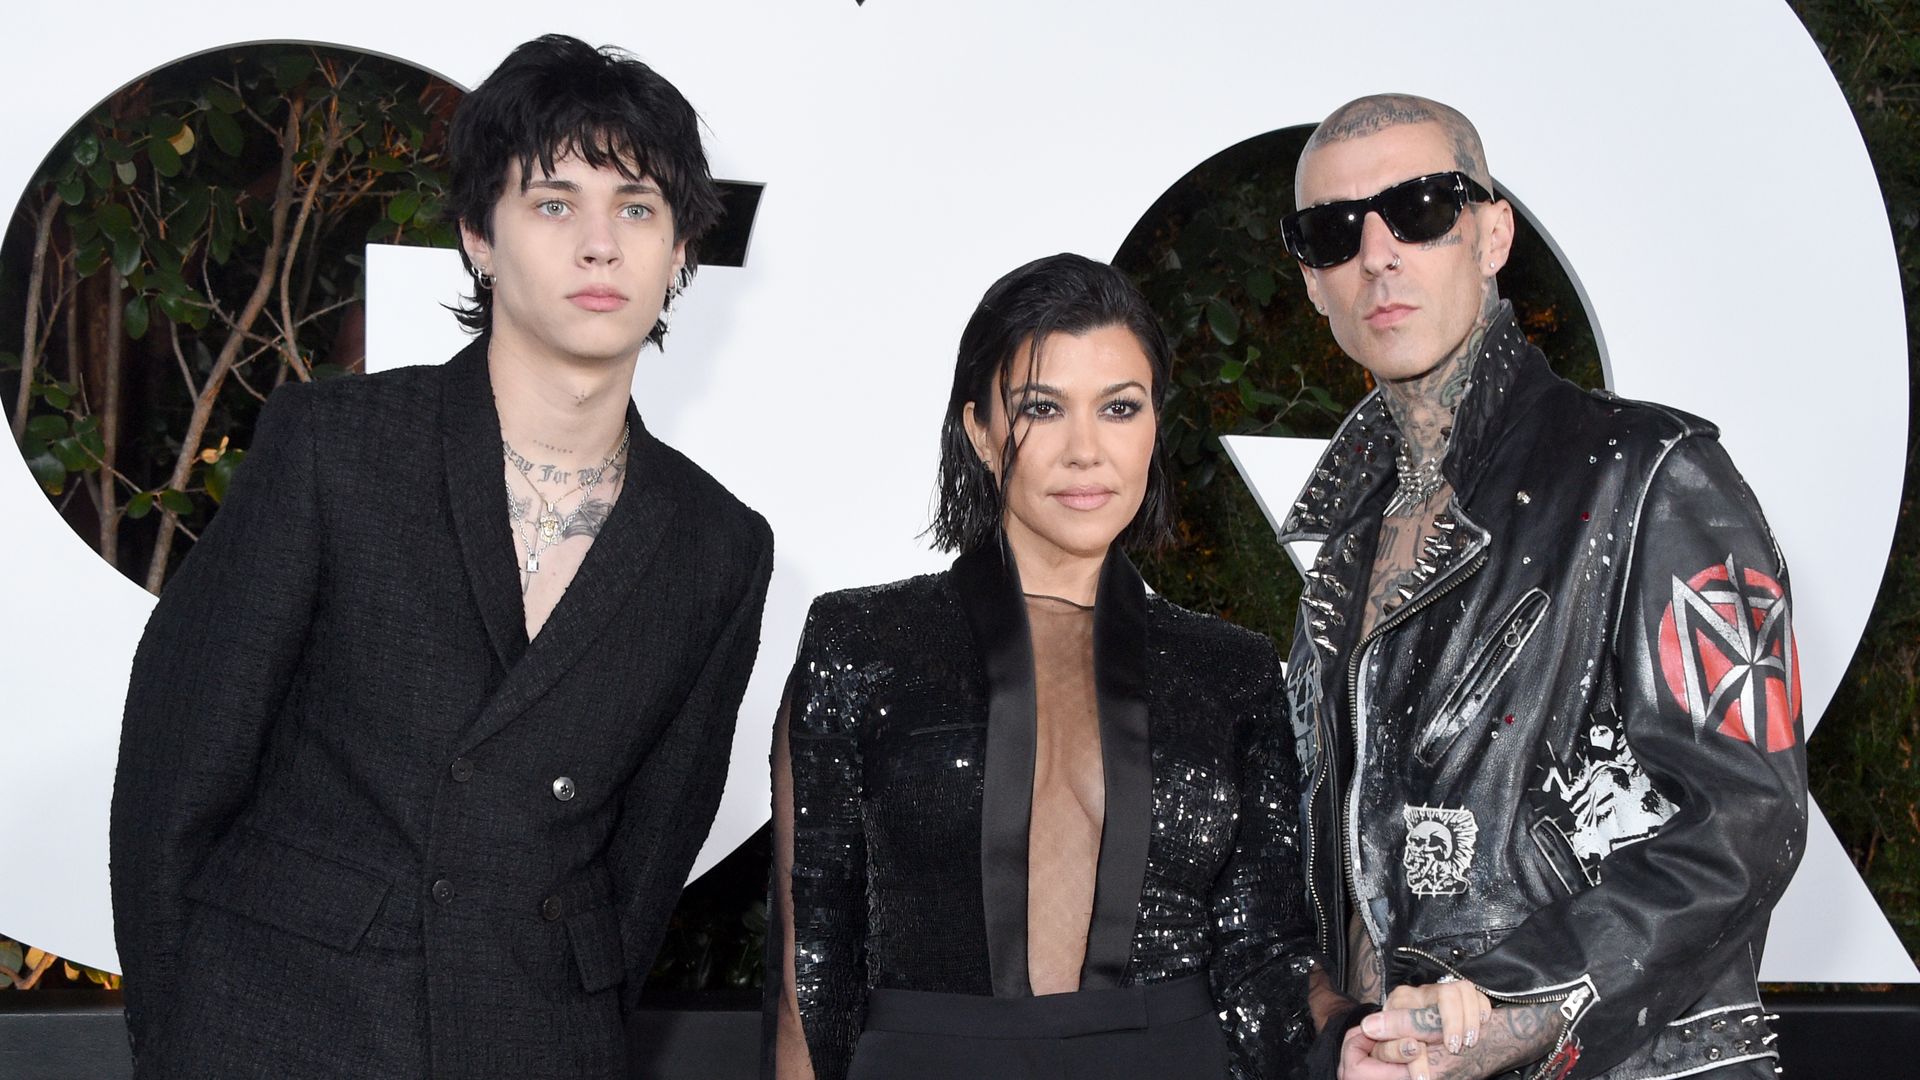 Landon Asher Barker, Kourtney Kardashian, and Travis Barker attend the 2022 GQ Men Of The Year Party on November 17, 2022 in West Hollywood, California